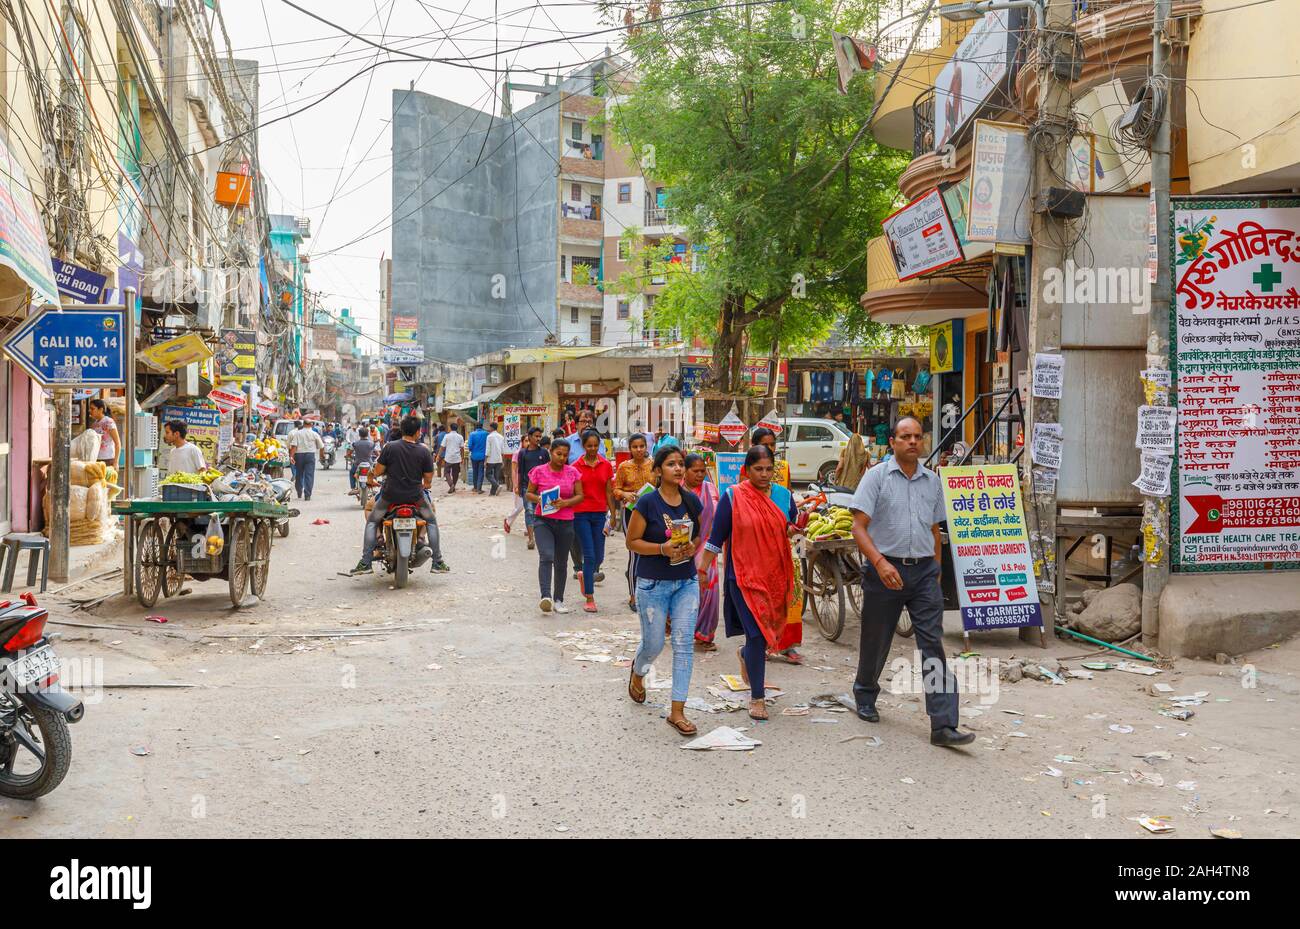 Busy street scene in a shopping area of Mahipalpur district, a suburb near Delhi Airport in New Delhi, capital city of India Stock Photo